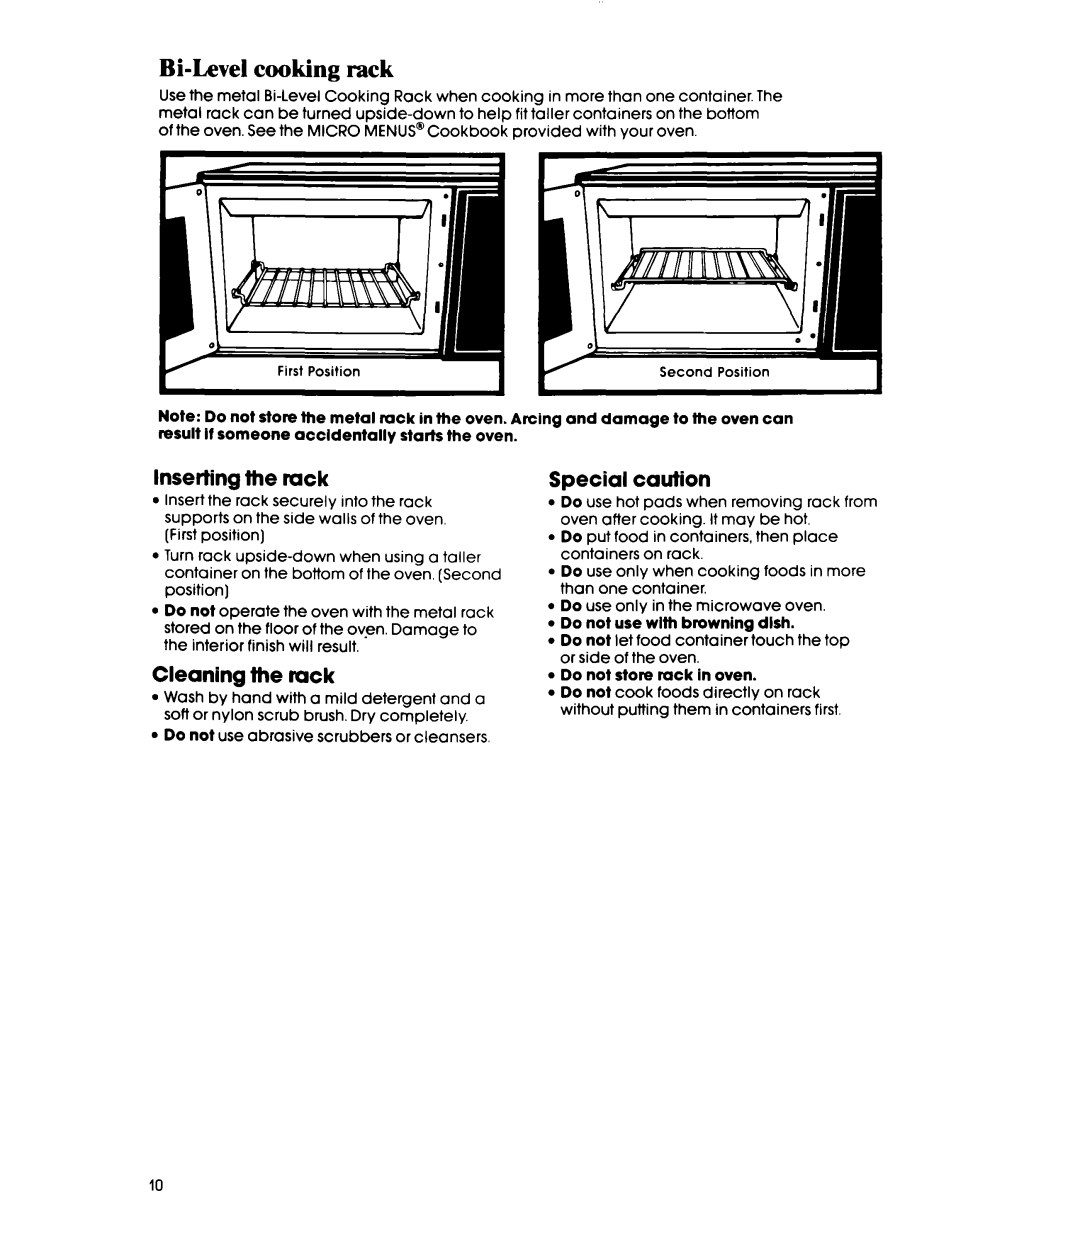 Whirlpool Microwace Oven manual Bi-Levelcooking rack, Inserting the rack, Cleaning the muck, Special caution 